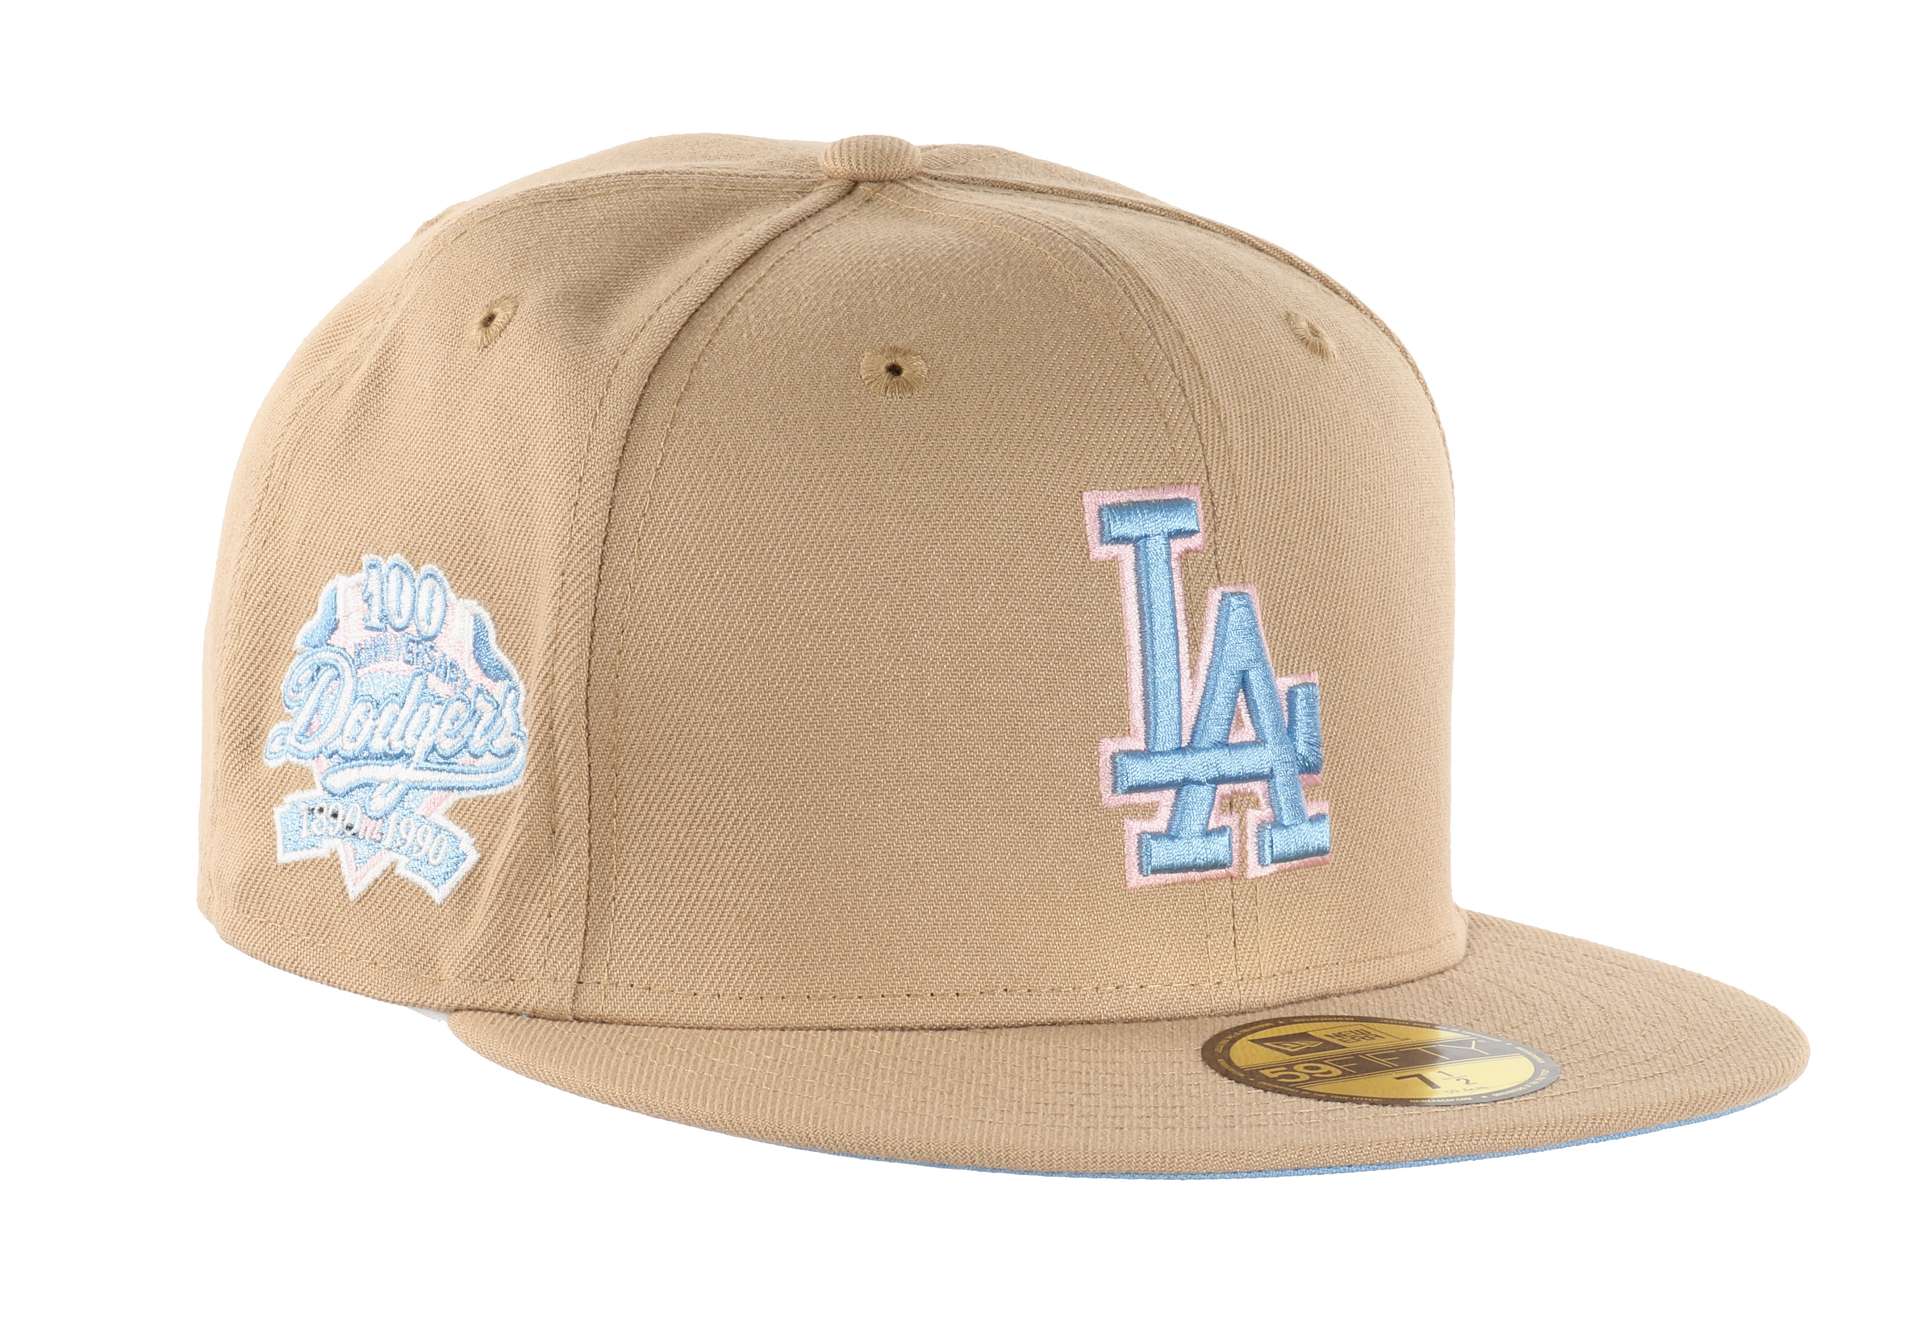 Los Angeles Dodgers MLB Cooperstown 100th Anniversary Sidepatch Camel Sky Blue 59Fifty Basecap New Era